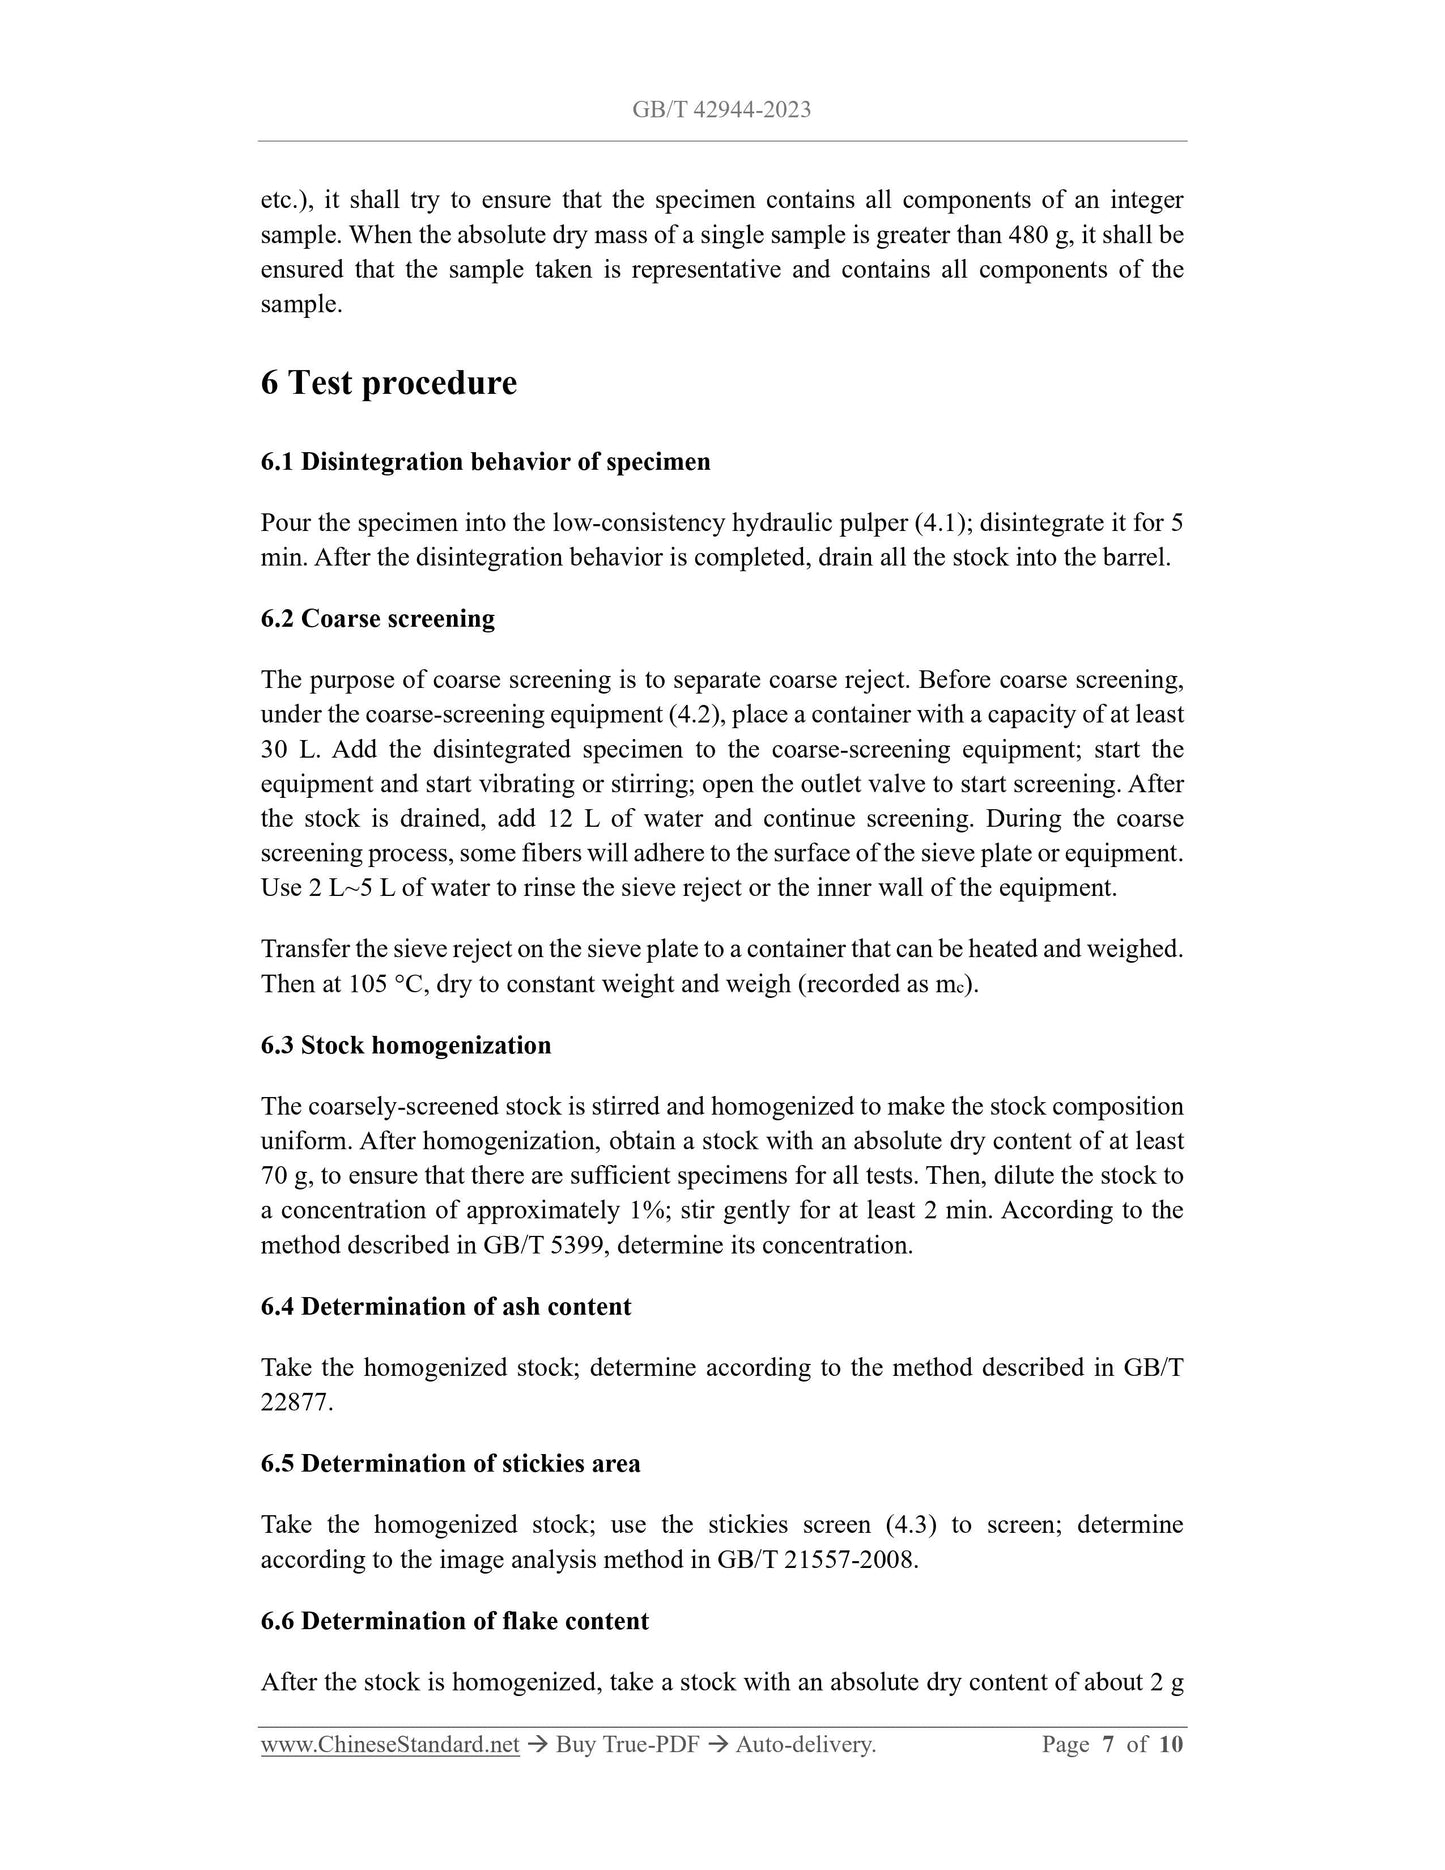 GB/T 42944-2023 Page 5